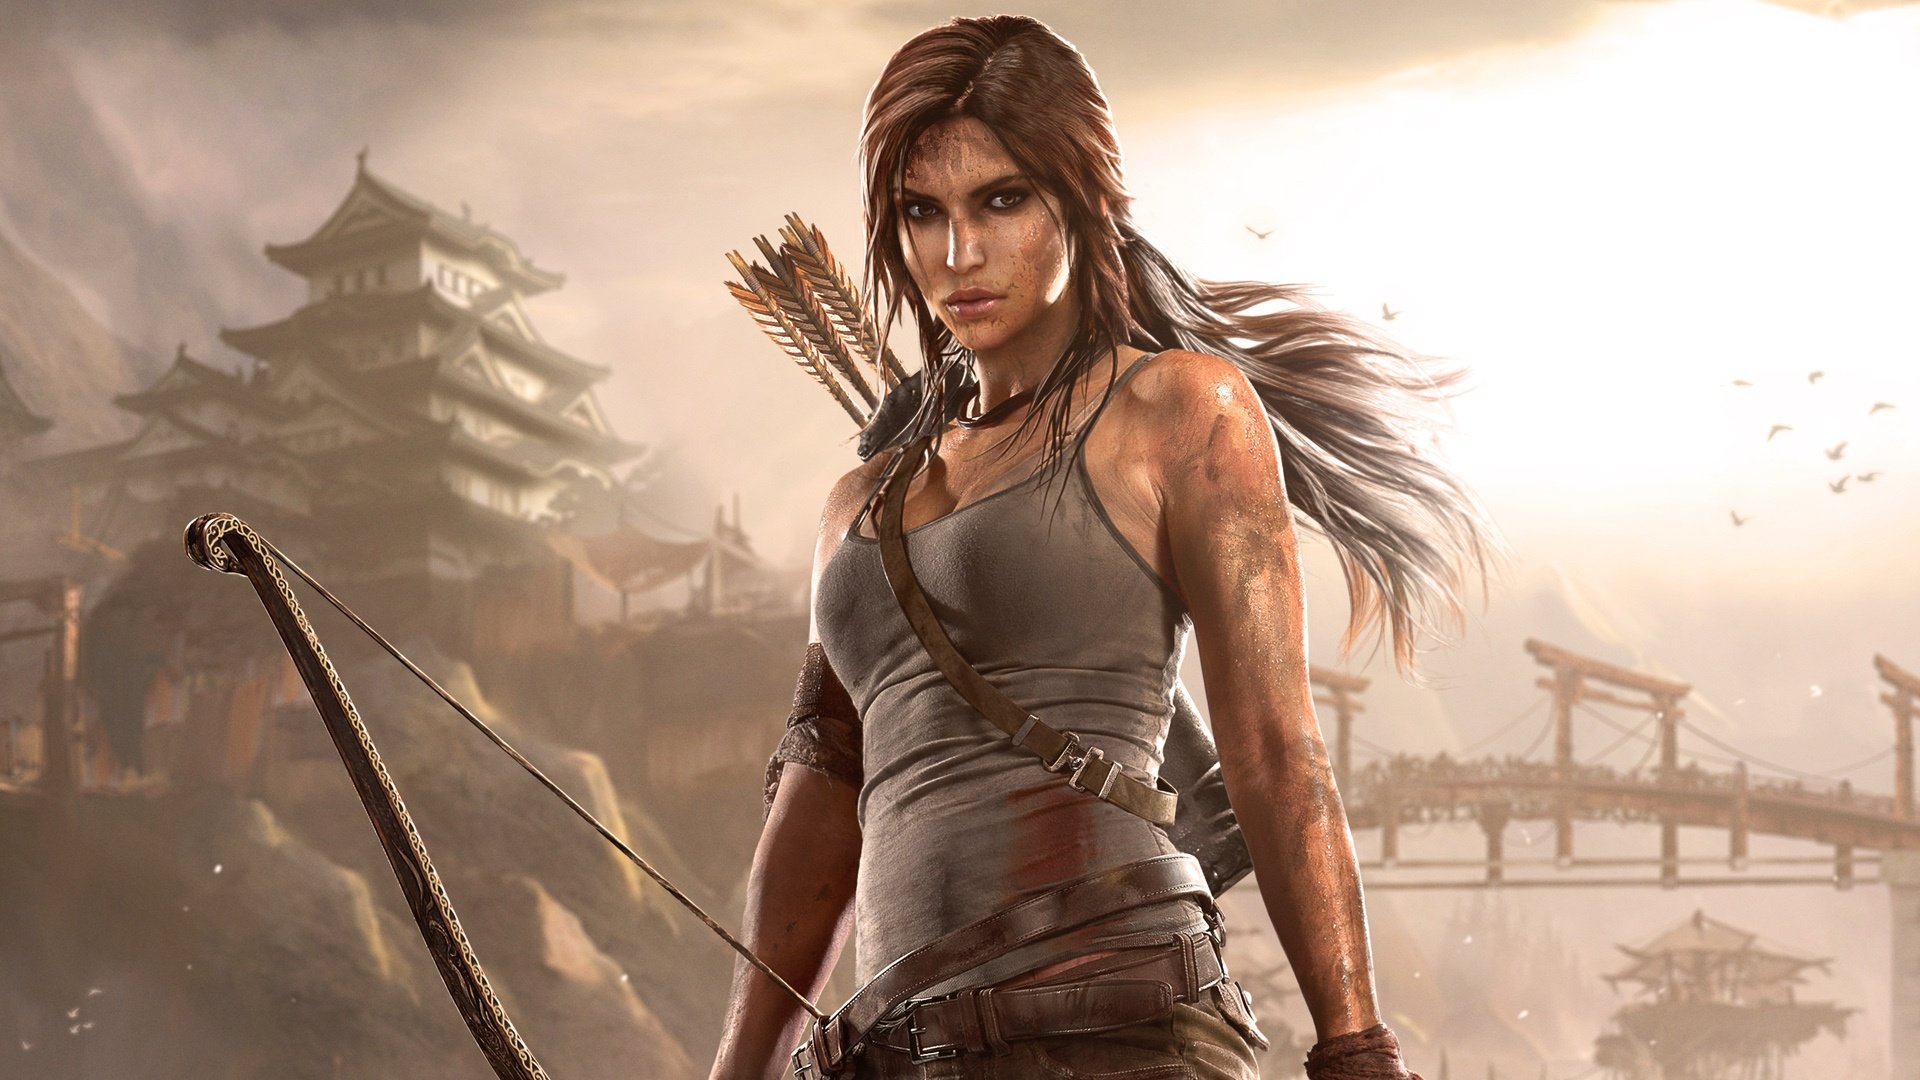 Tomb Raider 2013 Wallpapers HD Wallpapers 1920x1080